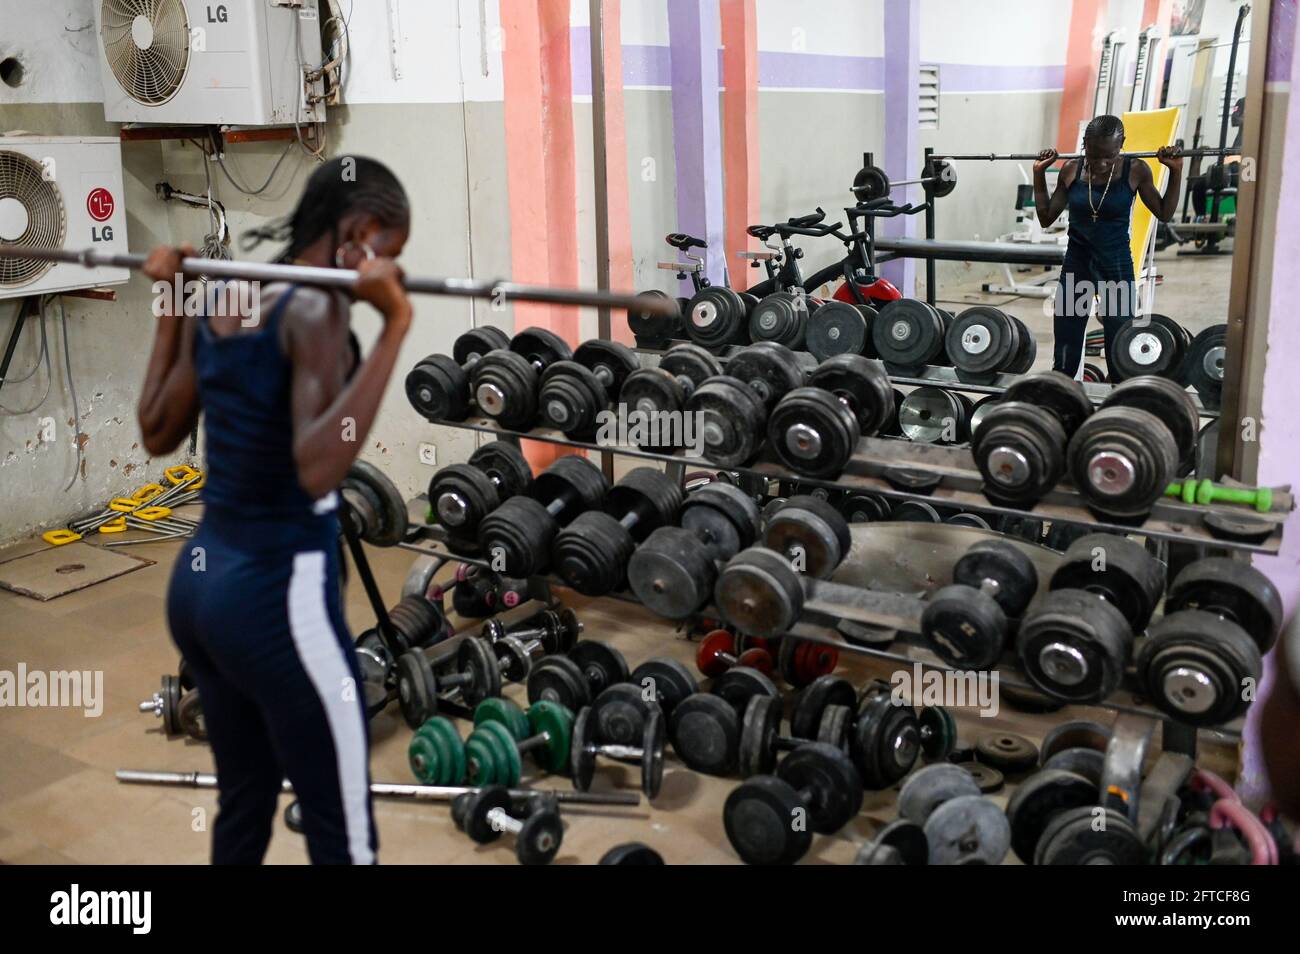 SENEGAL, Thies, gym, fitness and body building Studio, young woman doing training with weight lifting / junge Frau im Fitness Studio, Training mit Gewichte heben Stock Photo